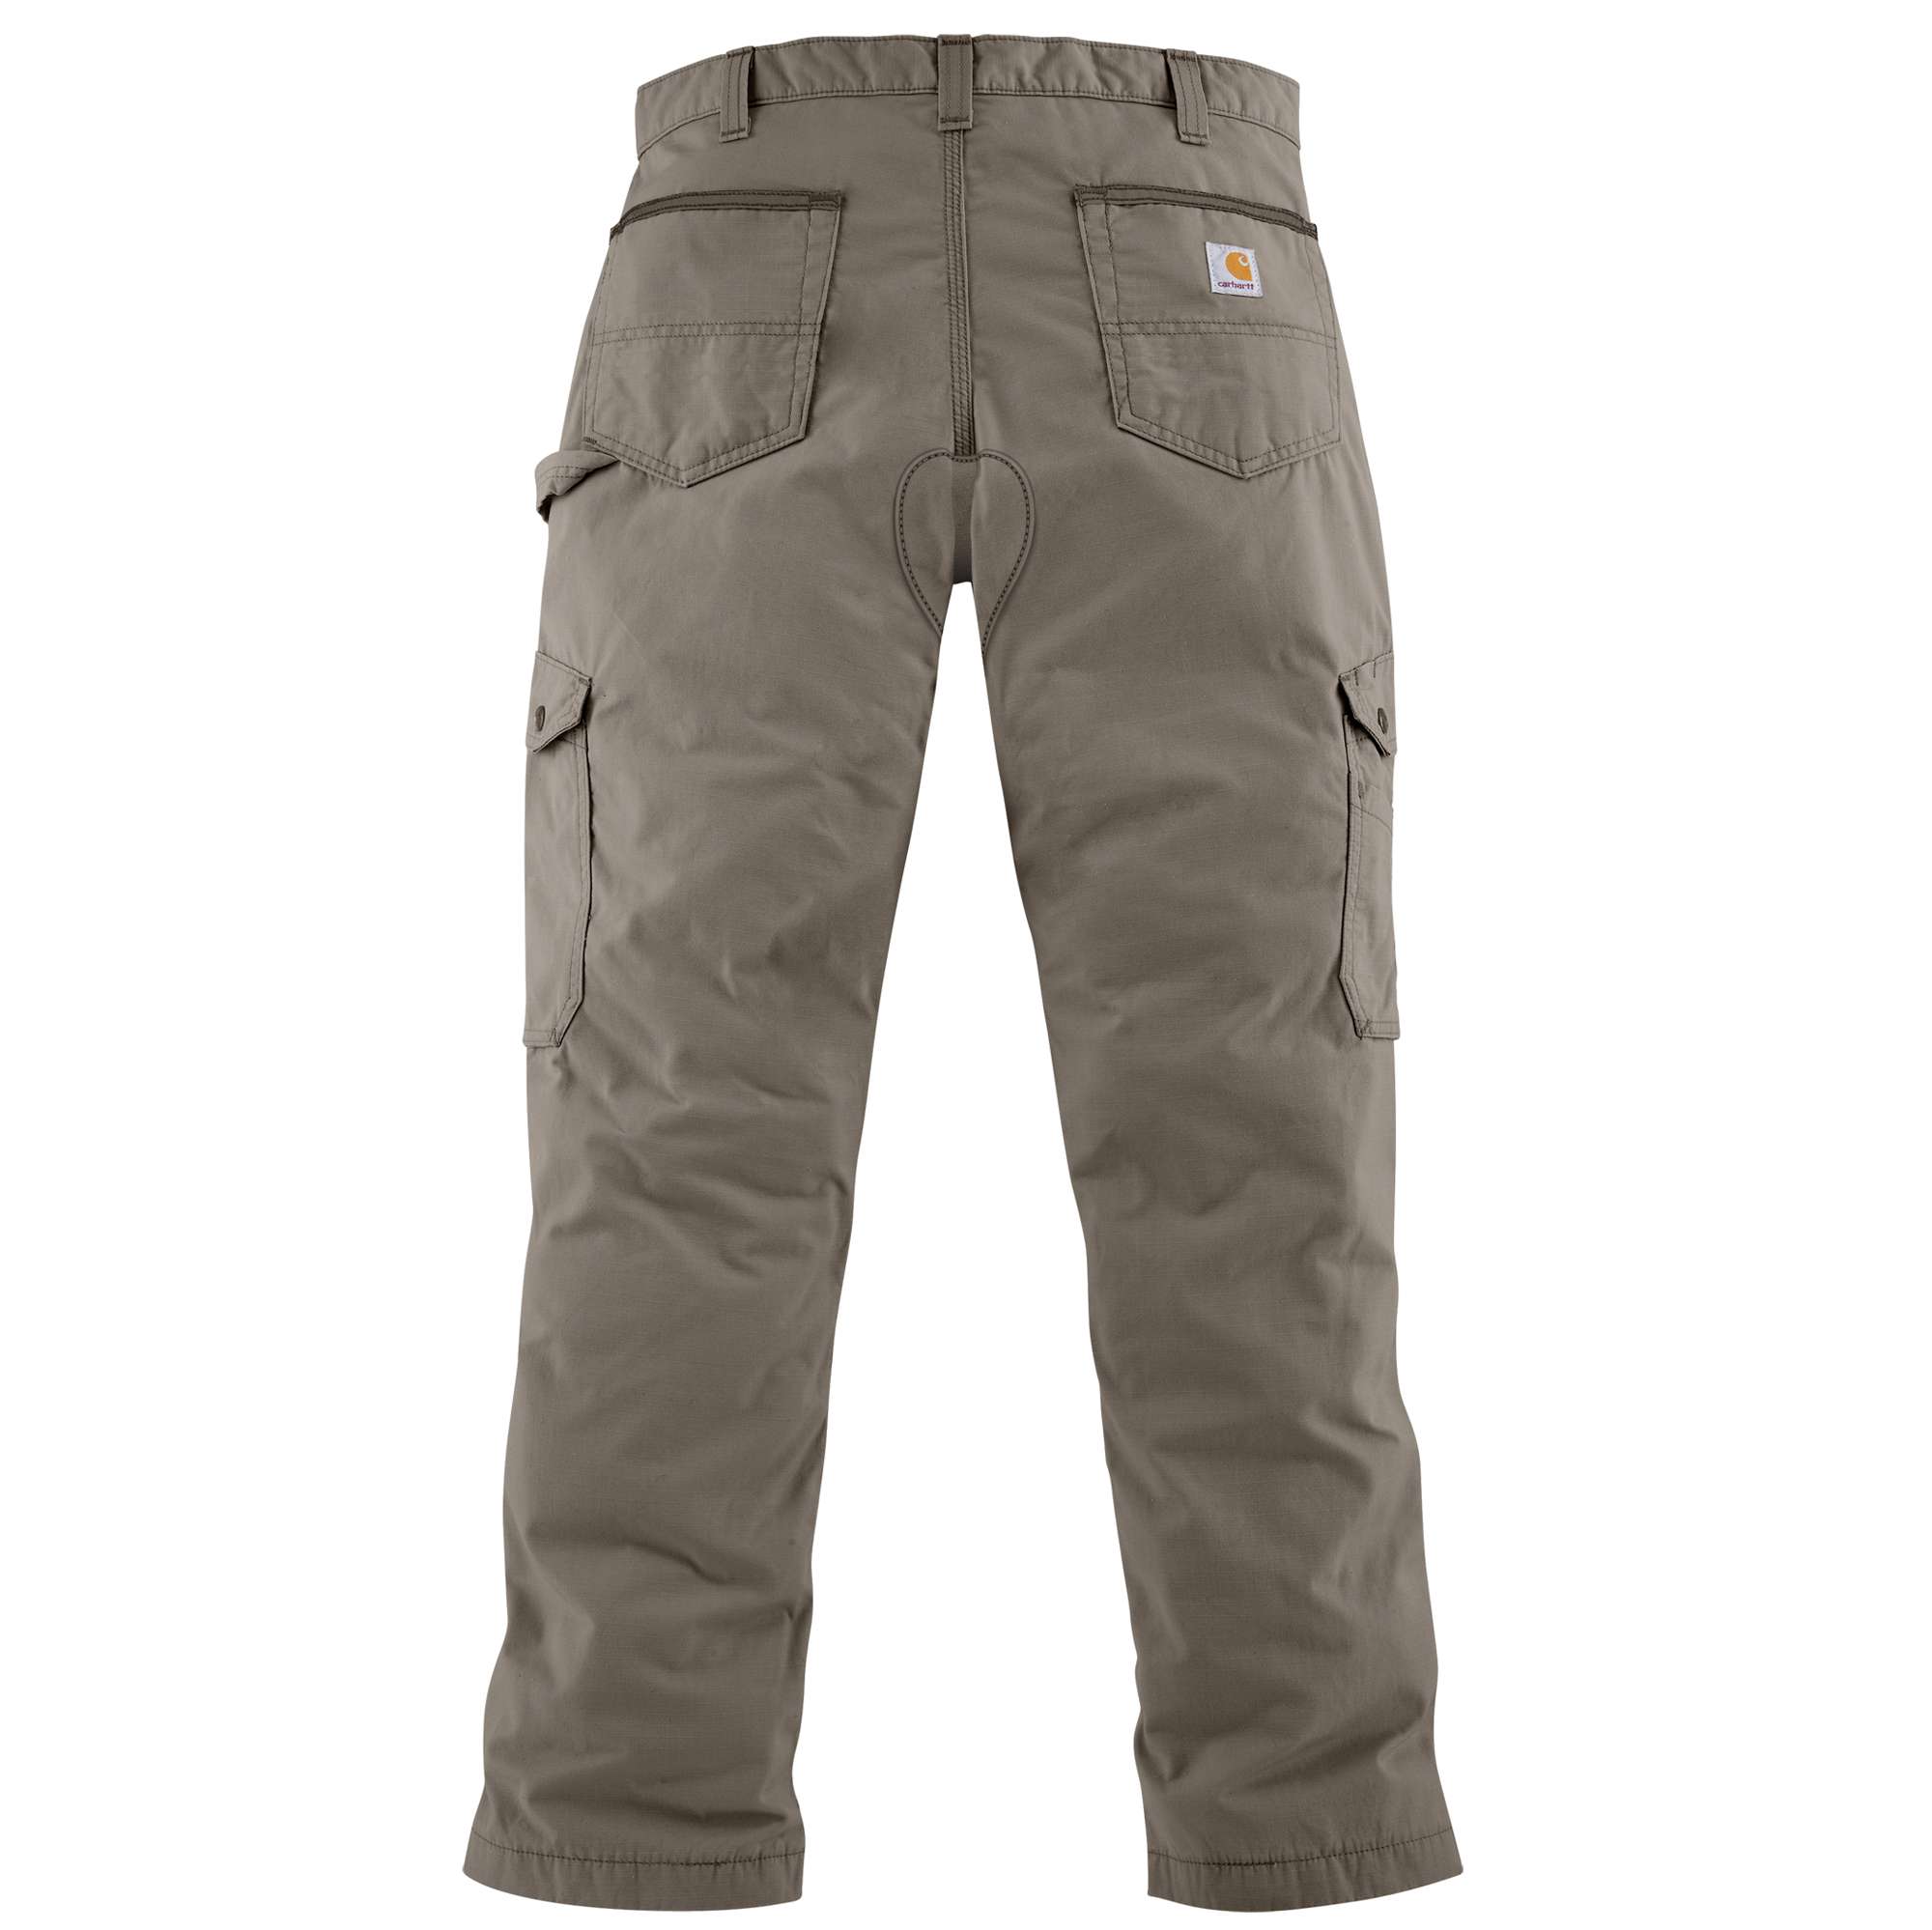 Carhartt Cargo Ripstop Pant Store - tundraecology.hi.is 1694377092